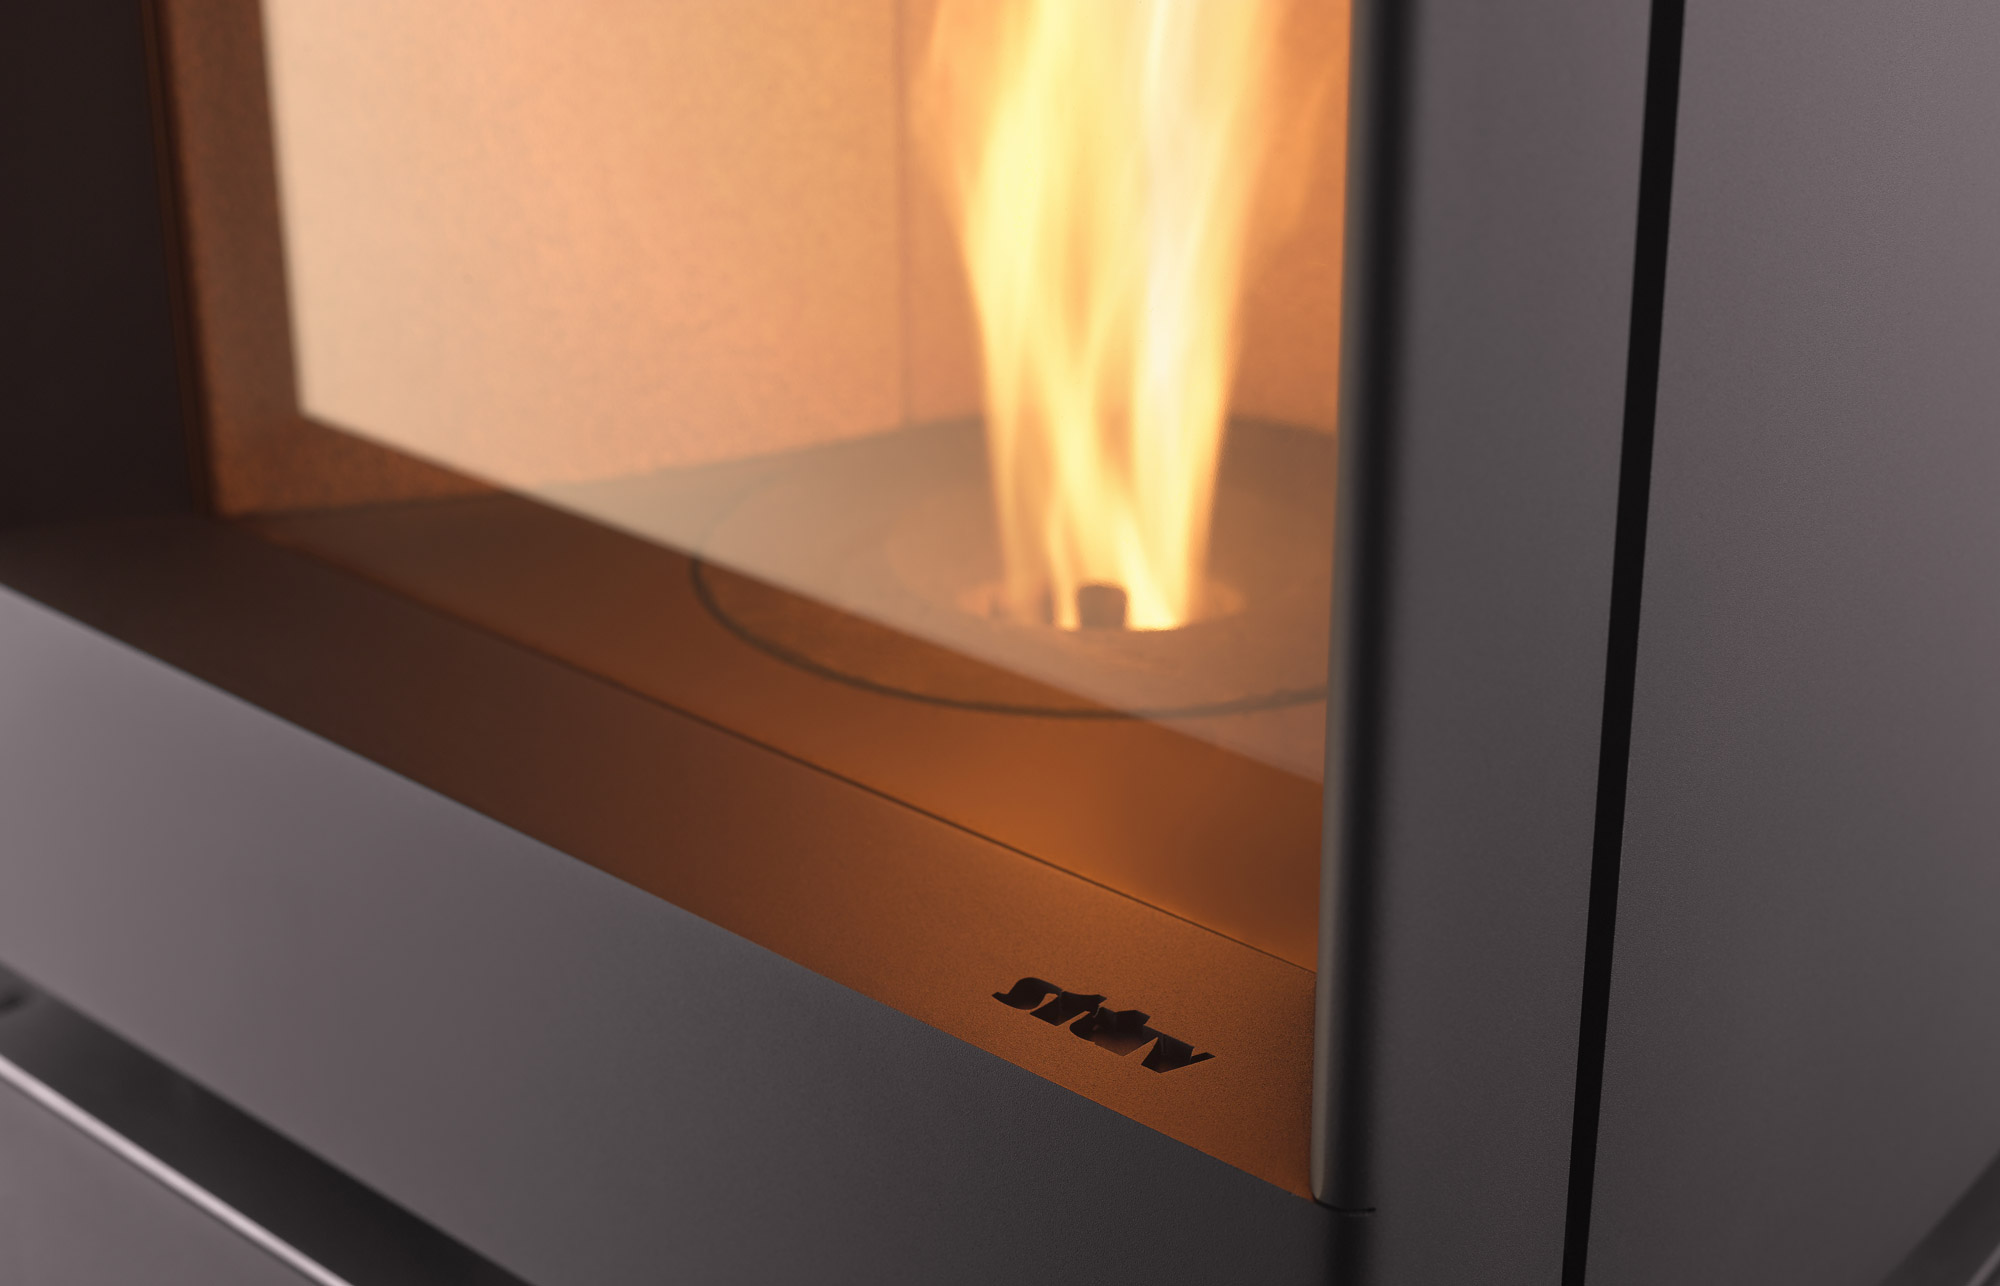 Patented technology for a sculpted flame